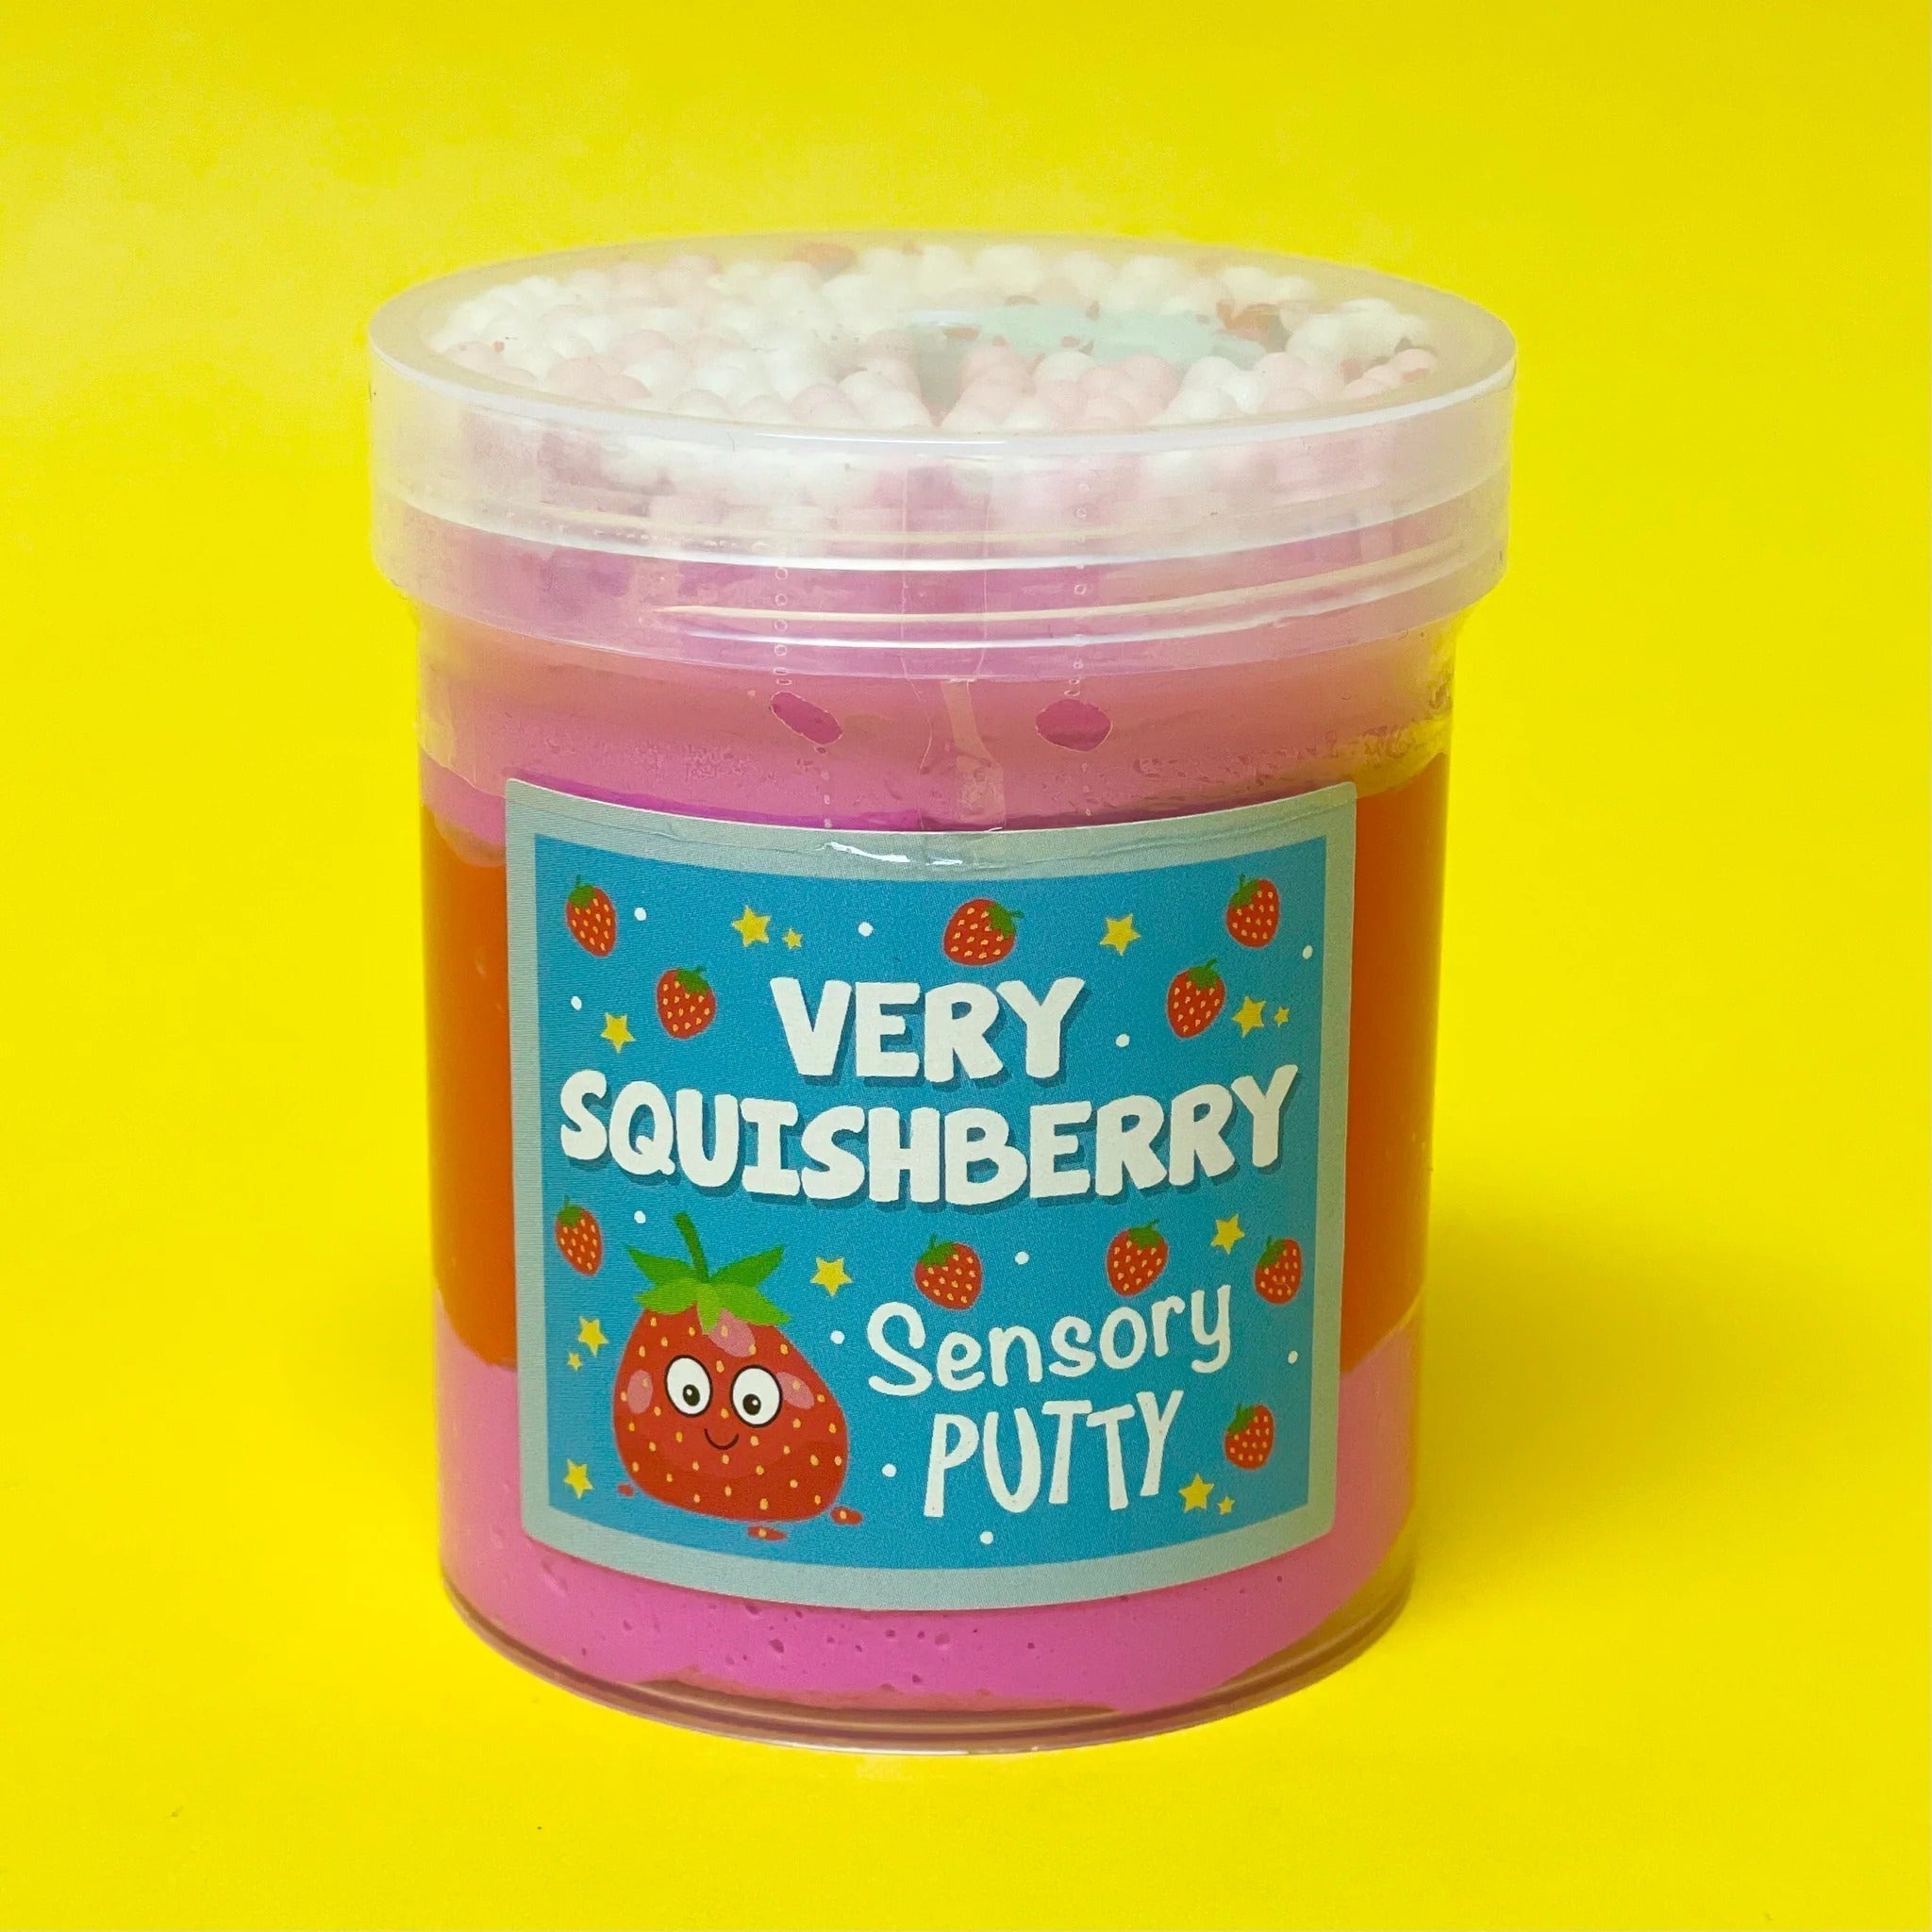 Very Squishberry Putty, Our Very Squishberry putty has three tiers of vibrant pink and red putty, topped with adorable strawberry sprinkles, pastel pink and white floam balls and a strawberry charm to top it off! Putties are air reactive and will dry out of left out. Always return to the container after play with the lid tightly on. Keep away from direct sunlight. Keep away from fabrics and porous surfaces. Container Size: 275ml Ages 5+, Adult supervision recommended. Very Squishberry Putty Washing hands th